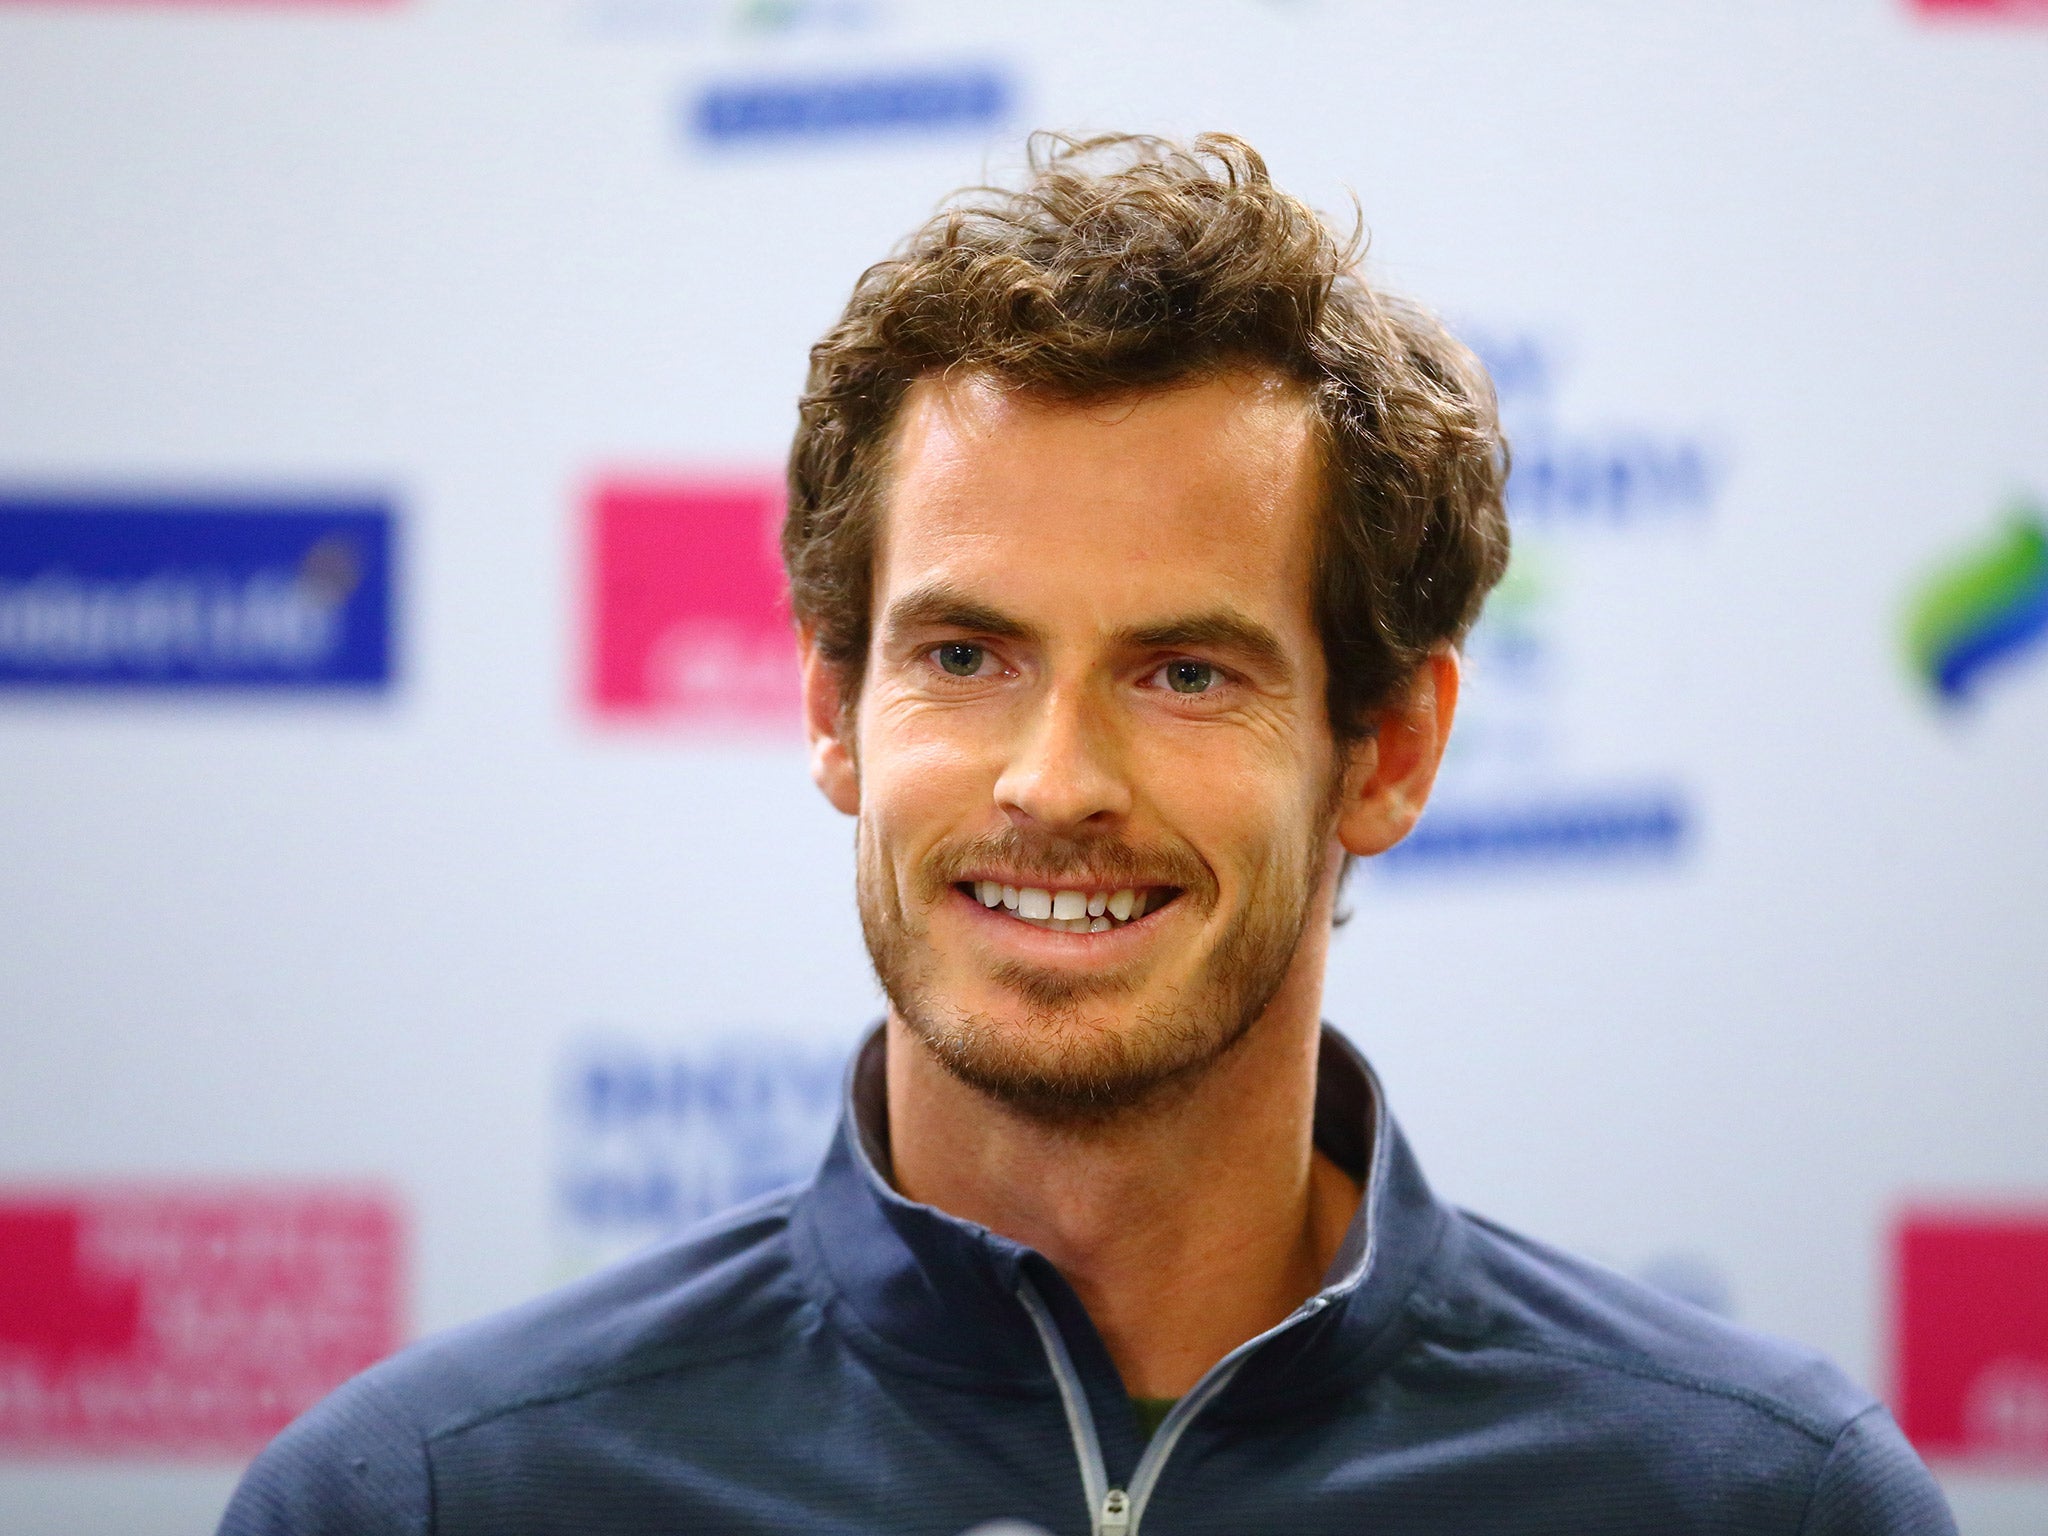 Andy Murray announces plans to host 'Andy Murray Live' to raise money for charity